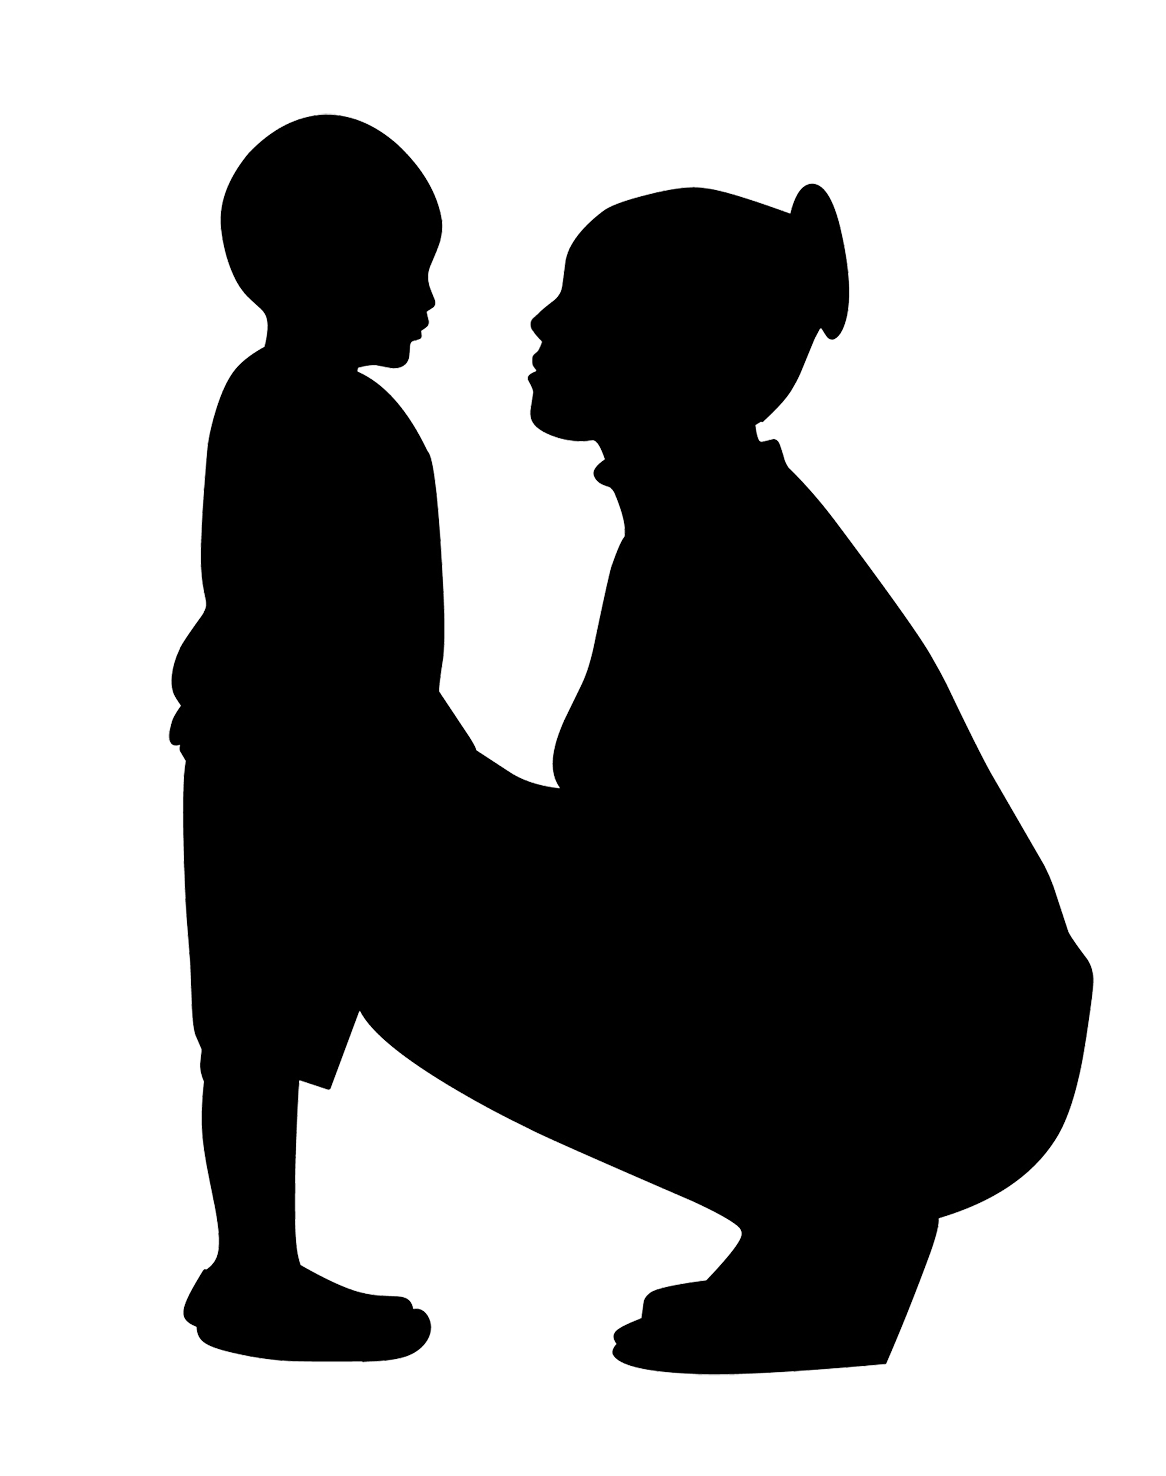 silhouette of mother and child